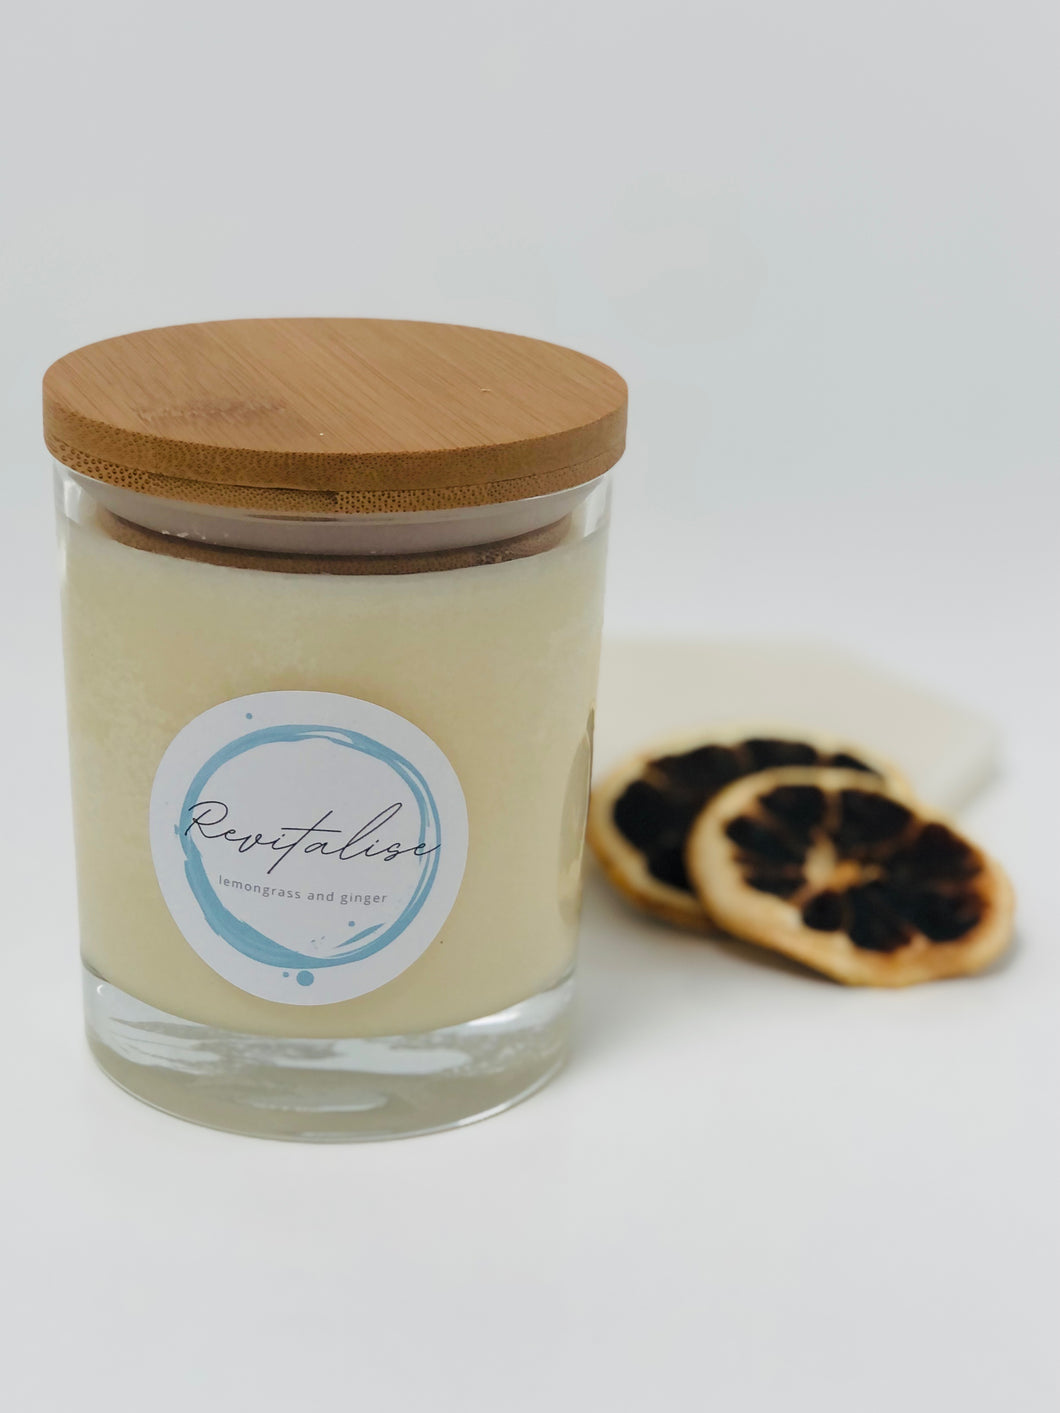 Revitalise Lemongrass and Ginger Candle